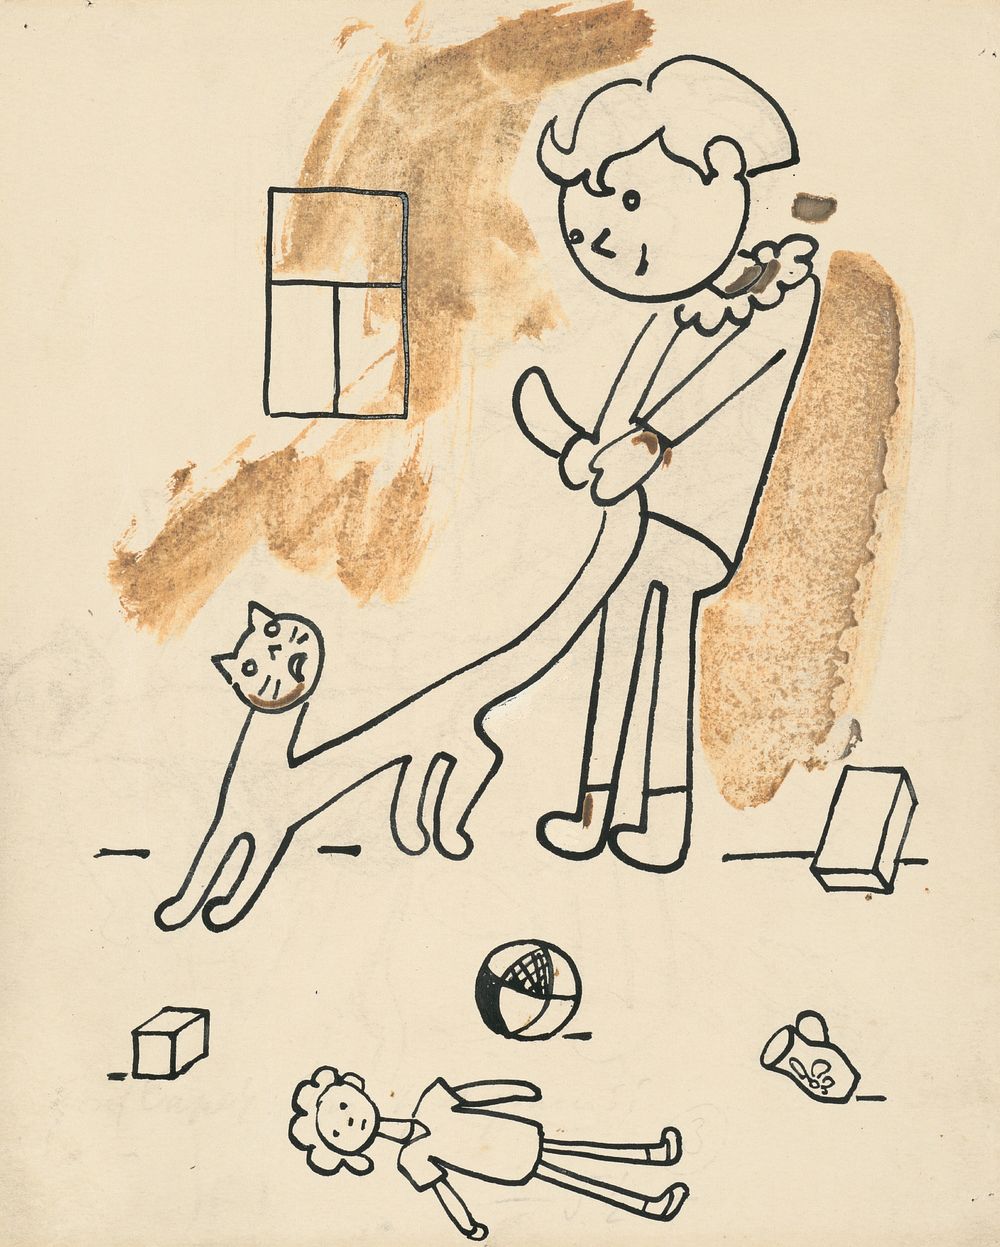 37. i snake and dog and a cat by Josef Čapek